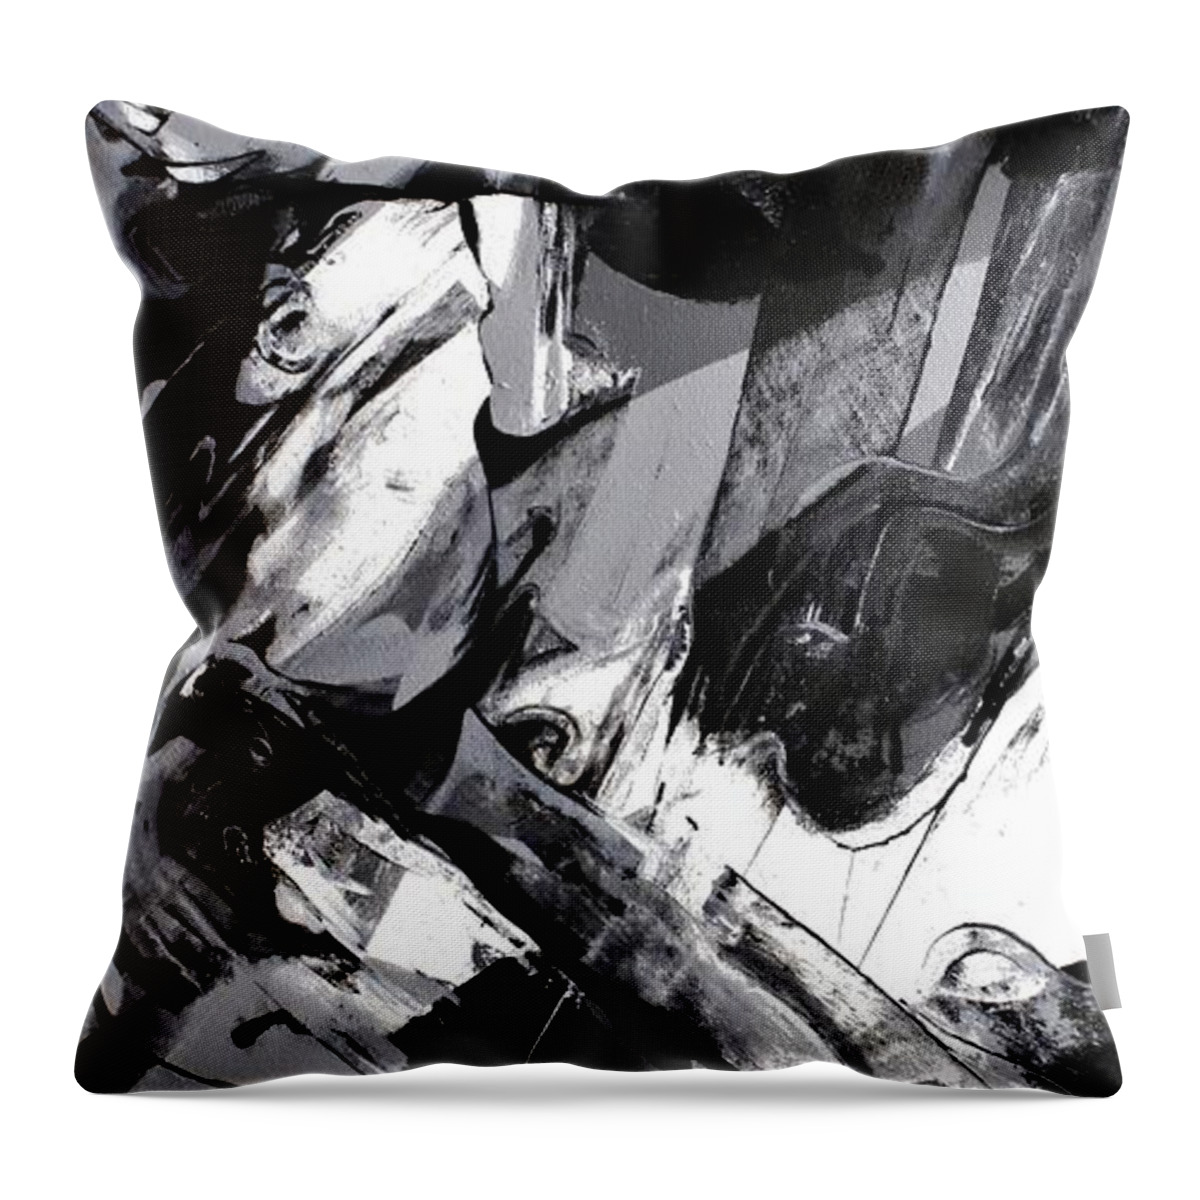 Relapse Throw Pillow featuring the painting Relapse Harvest by Jeff Klena